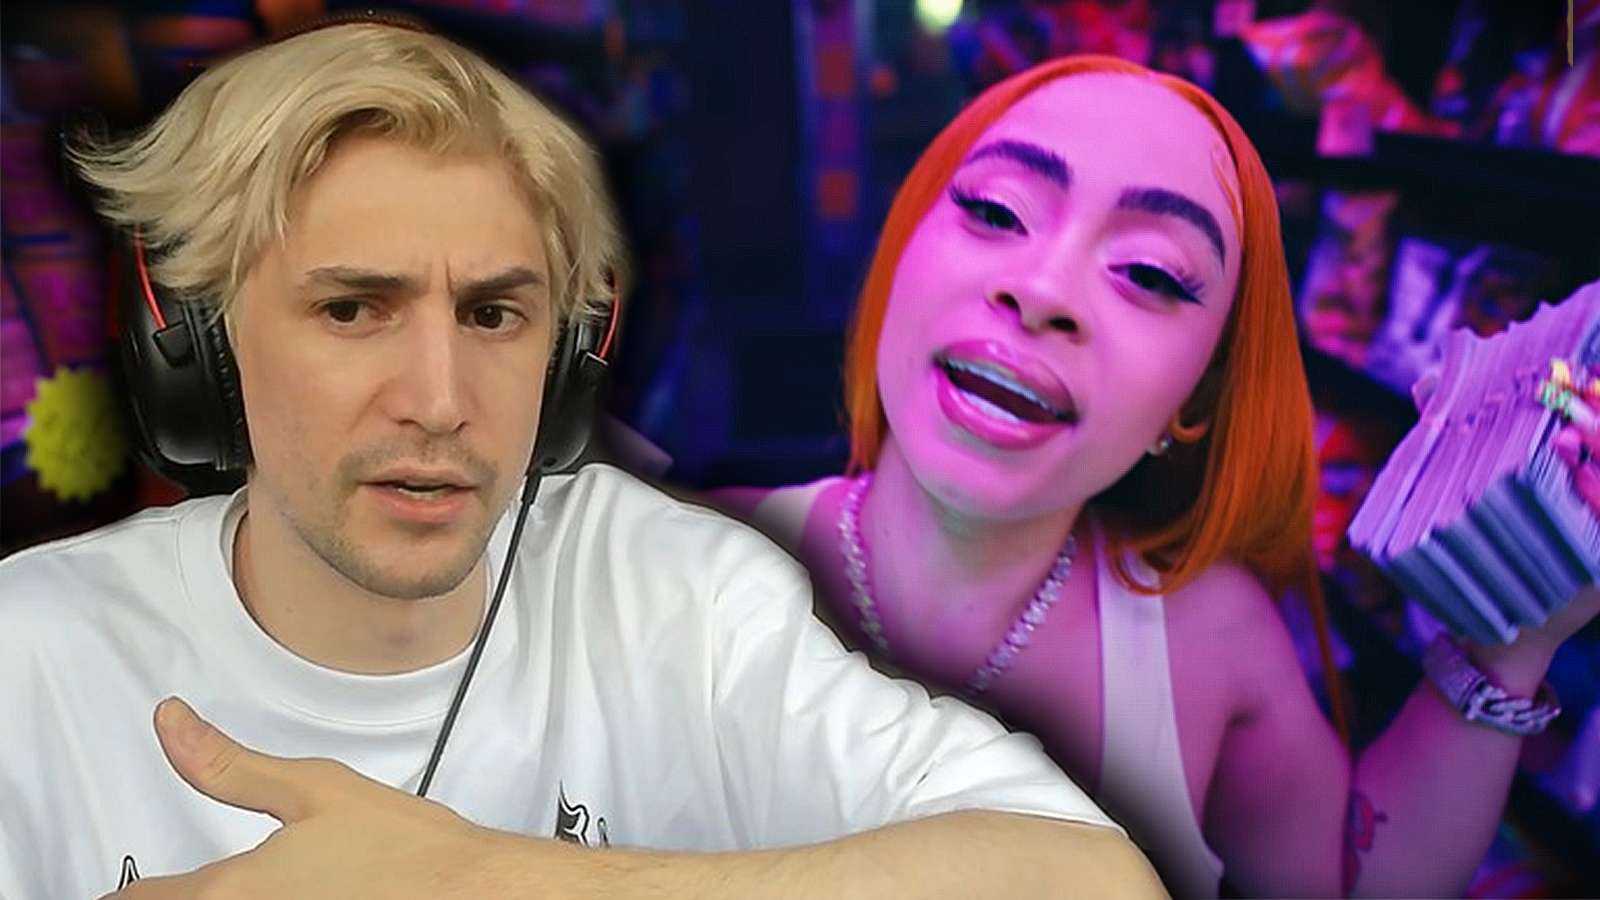 xqc-ice-spice-music-video-concerns